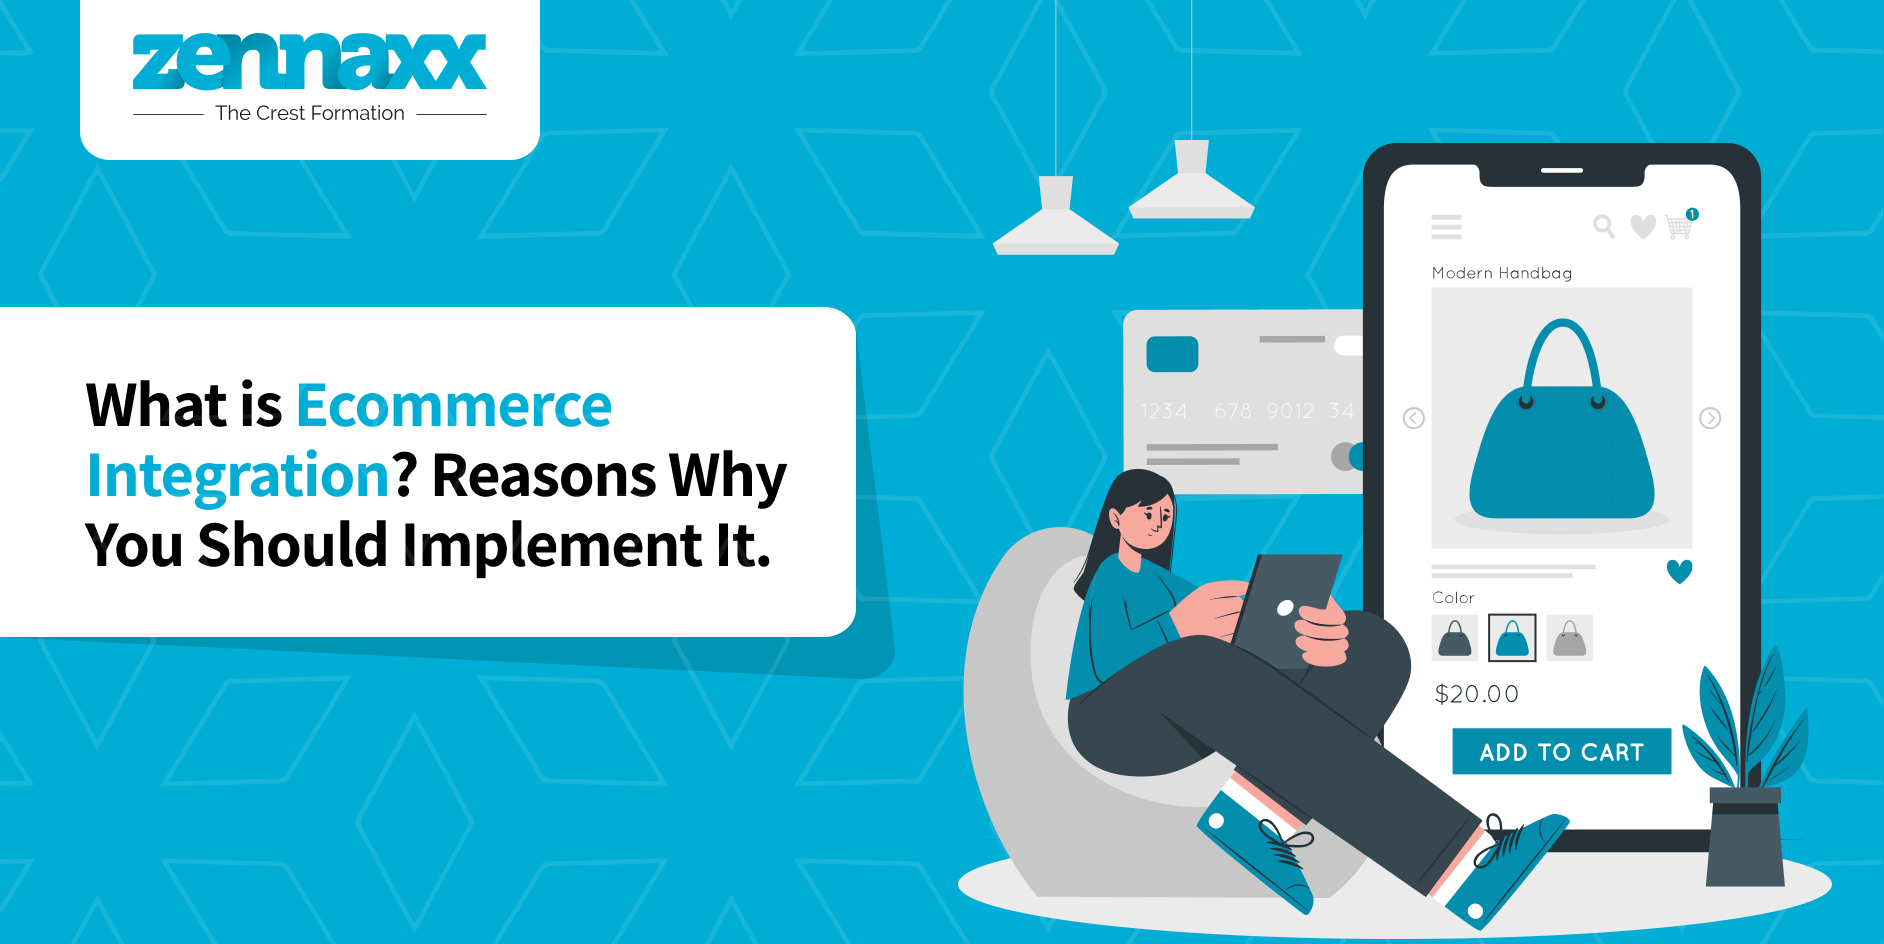 What is Ecommerce integration? Reasons why you should implement it